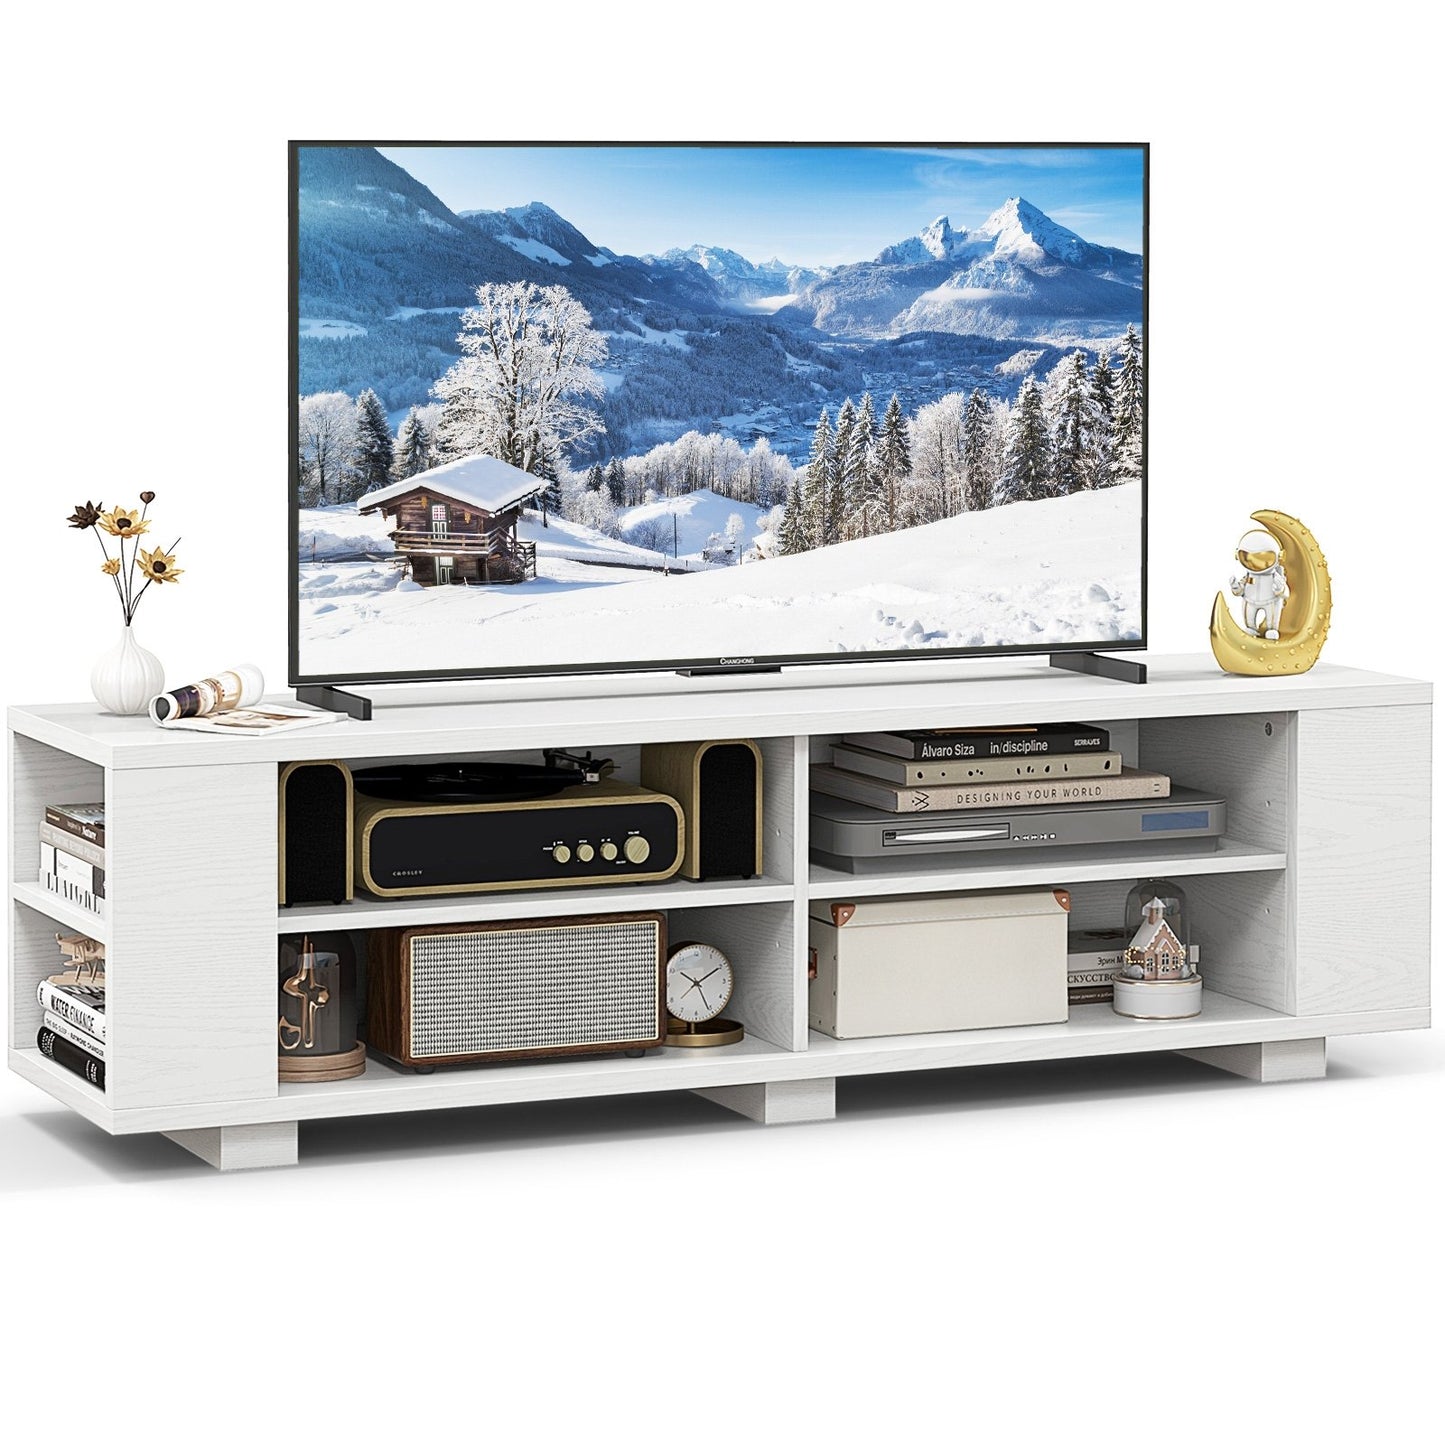 Wooden TV Stand with 8 Open Shelves for TVs up to 65 Inch Flat Screen, White